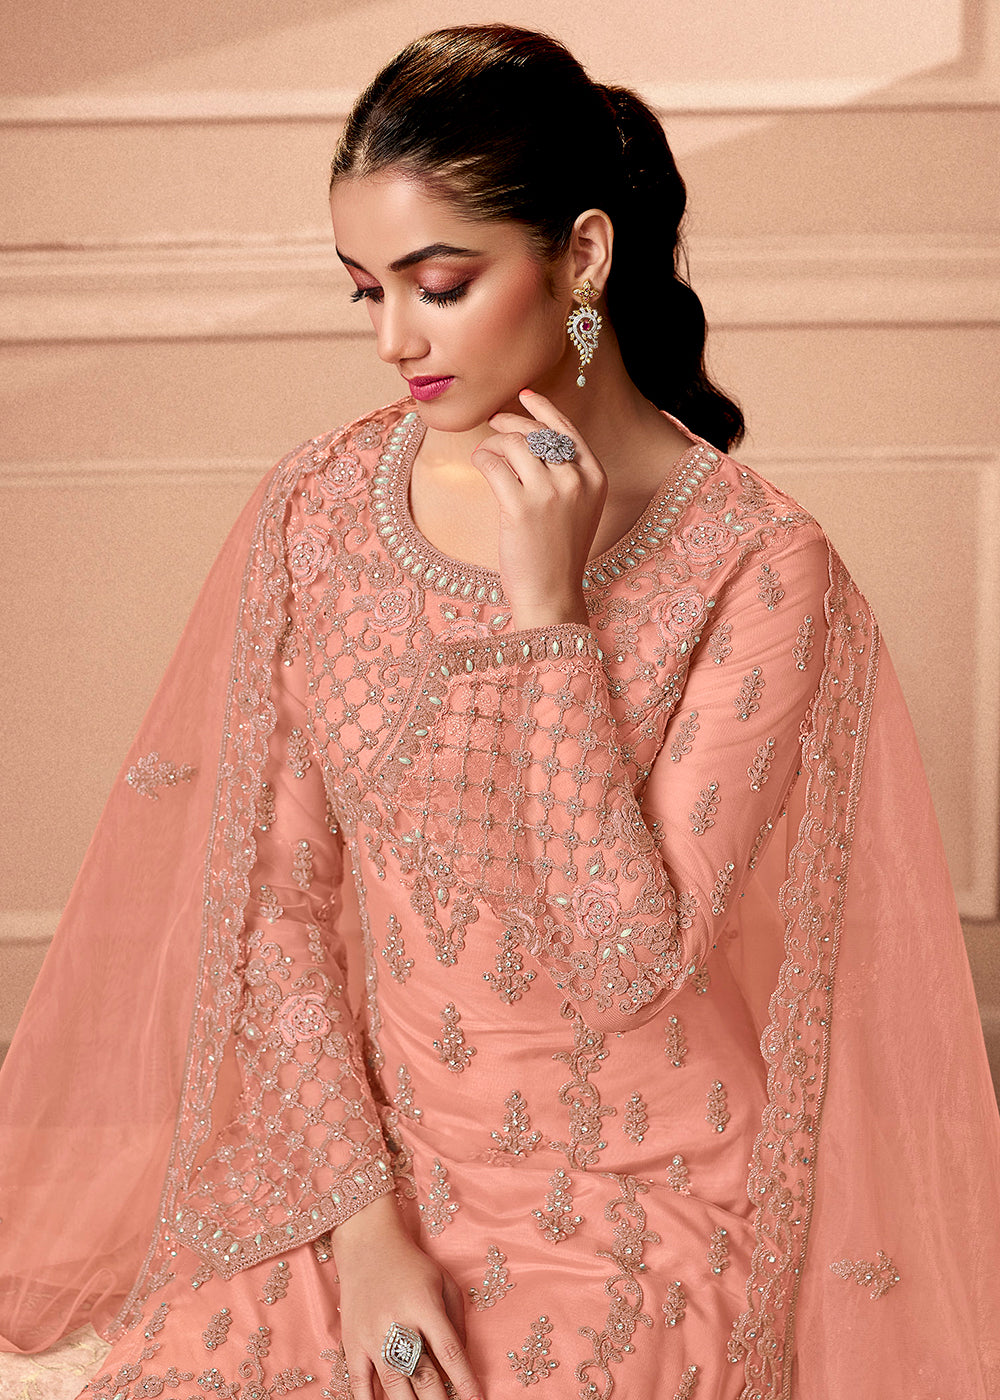 Buy Now Pant Style Appealing Peach Embroidered Wedding Salwar Suit Online in USA, UK, Canada & Worldwide at Empress Clothing.